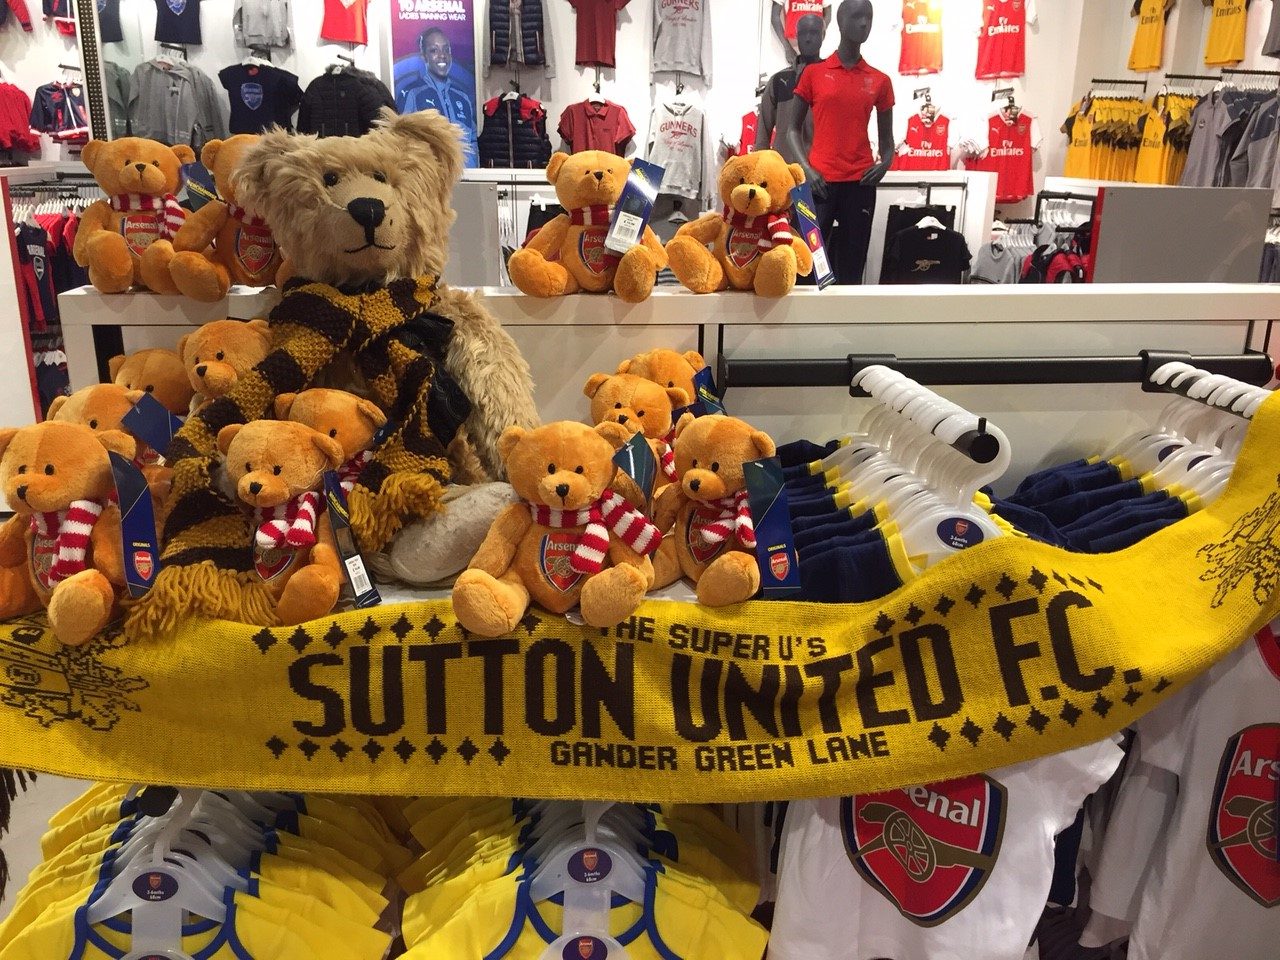 Sutton United: Who's the Best Bear